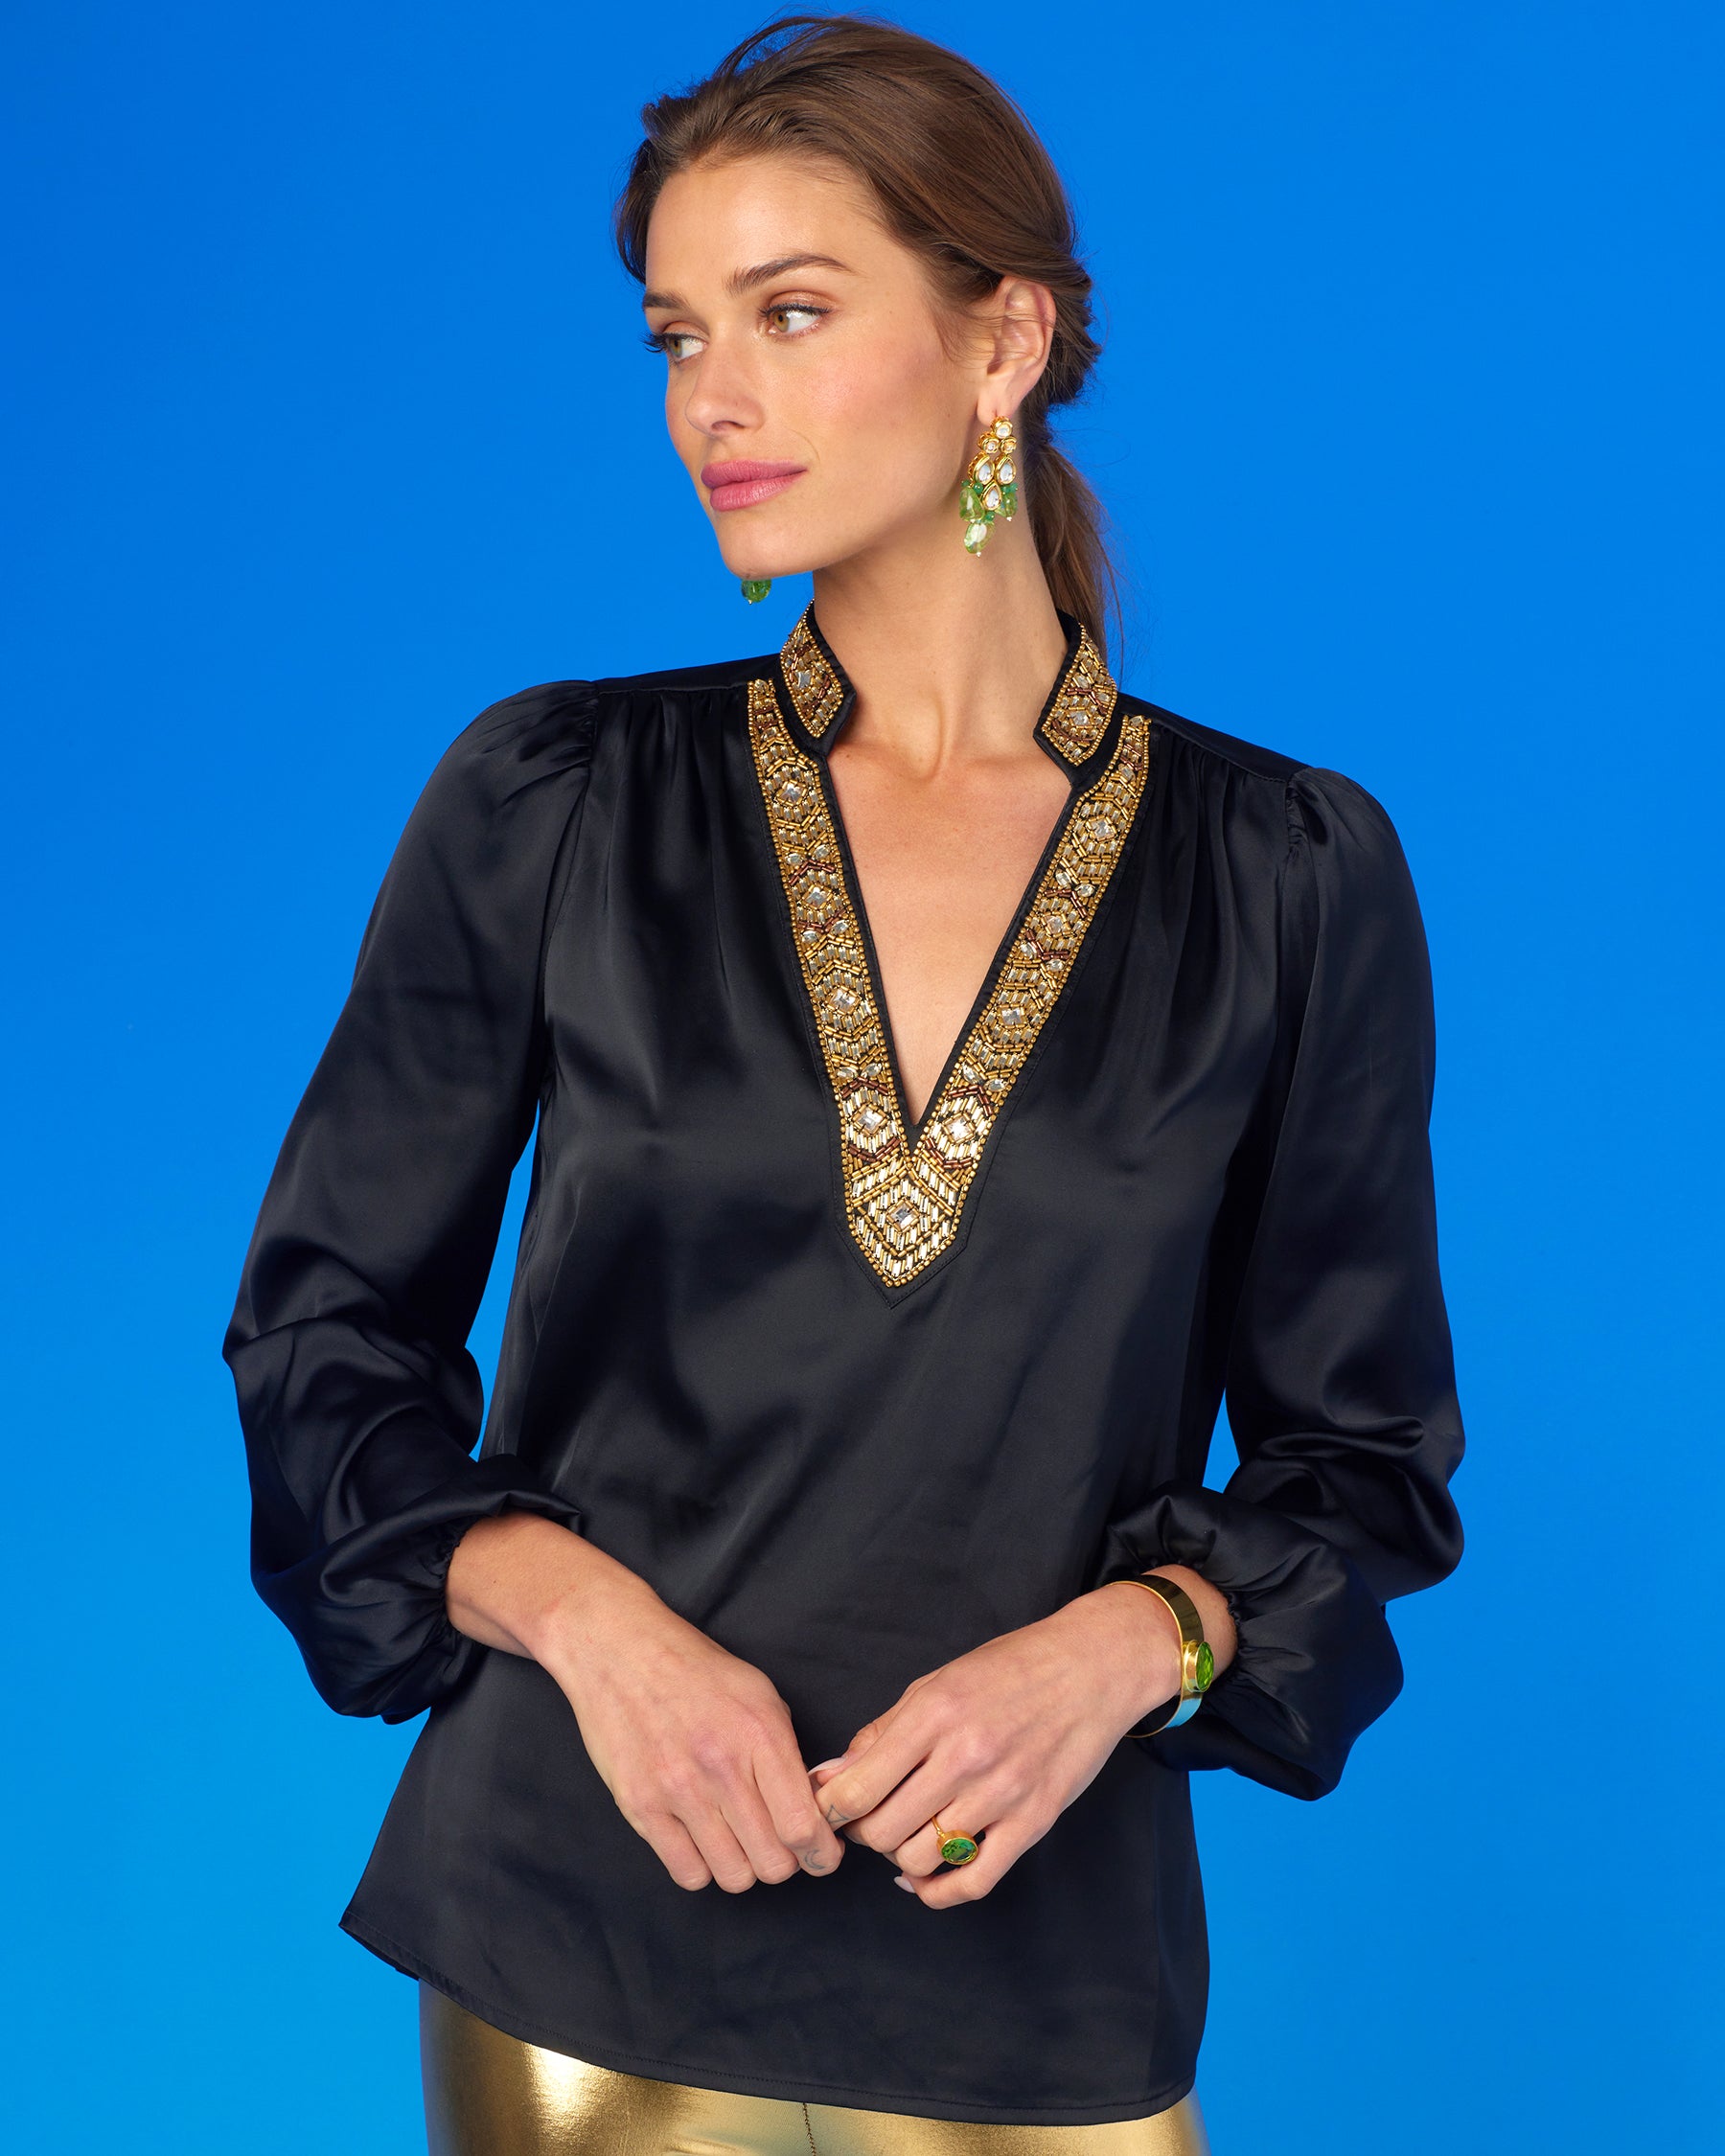 Anastasia Blouse in Black and Art Deco Embellishment with the bluse untucked